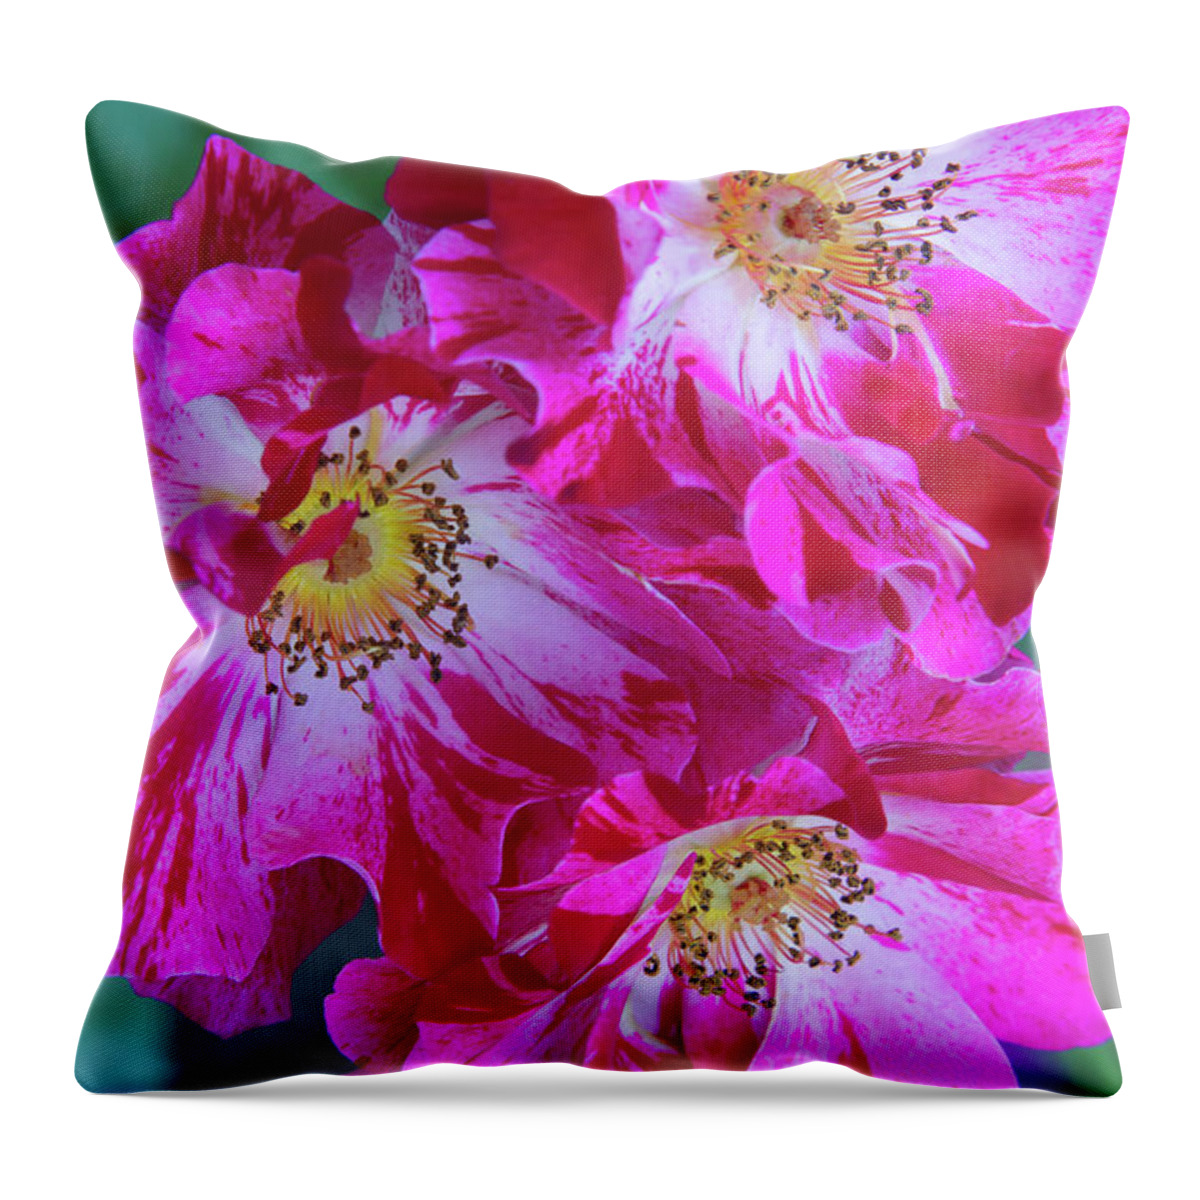 Climbing Roses Throw Pillow featuring the photograph Three Climbing Roses by Chris Scroggins